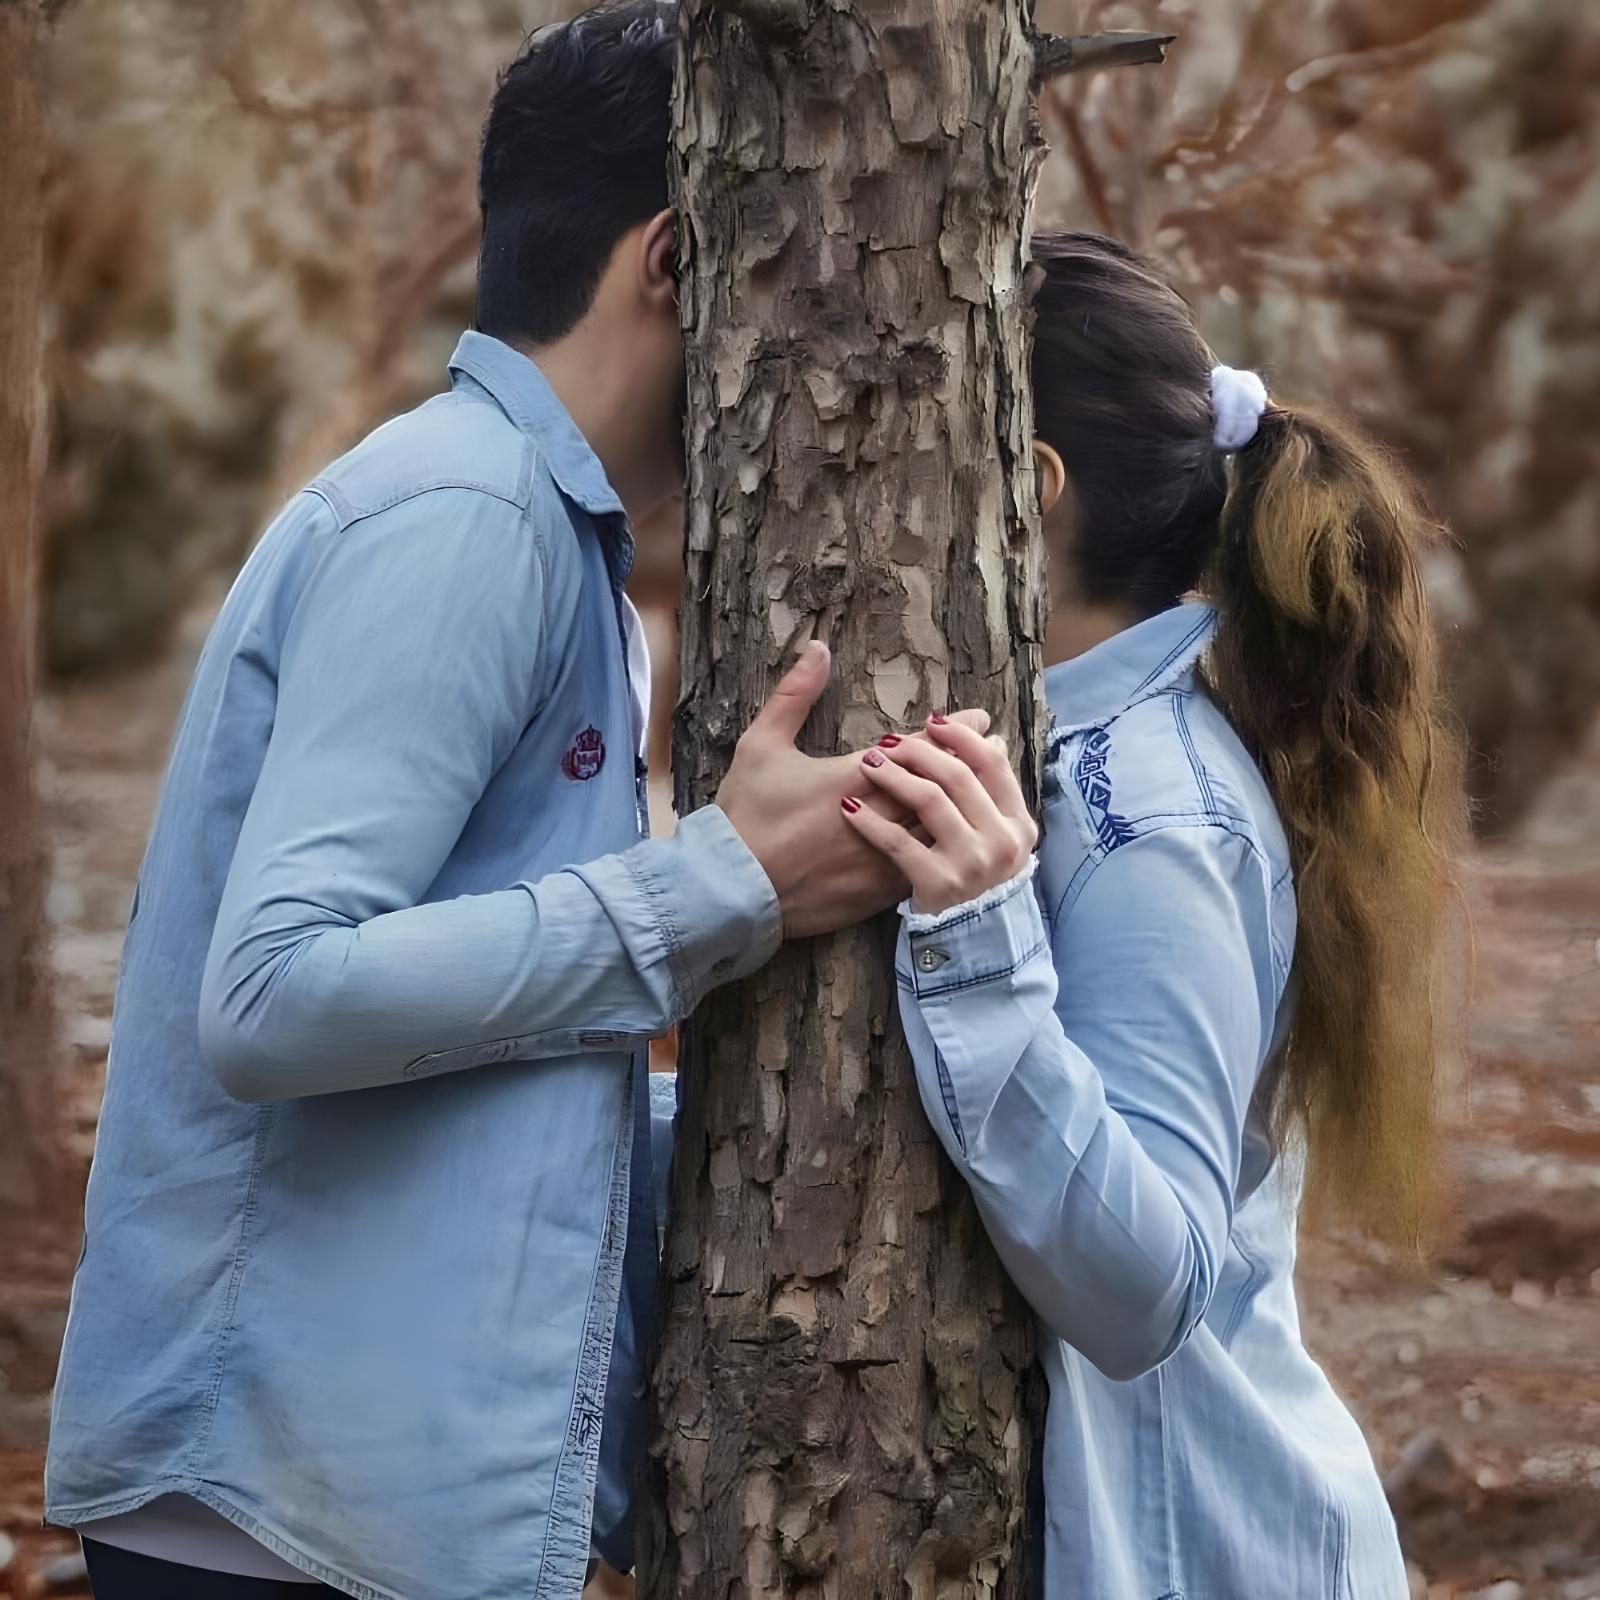 Couple Behind Tree Images For Whatsapp Dp